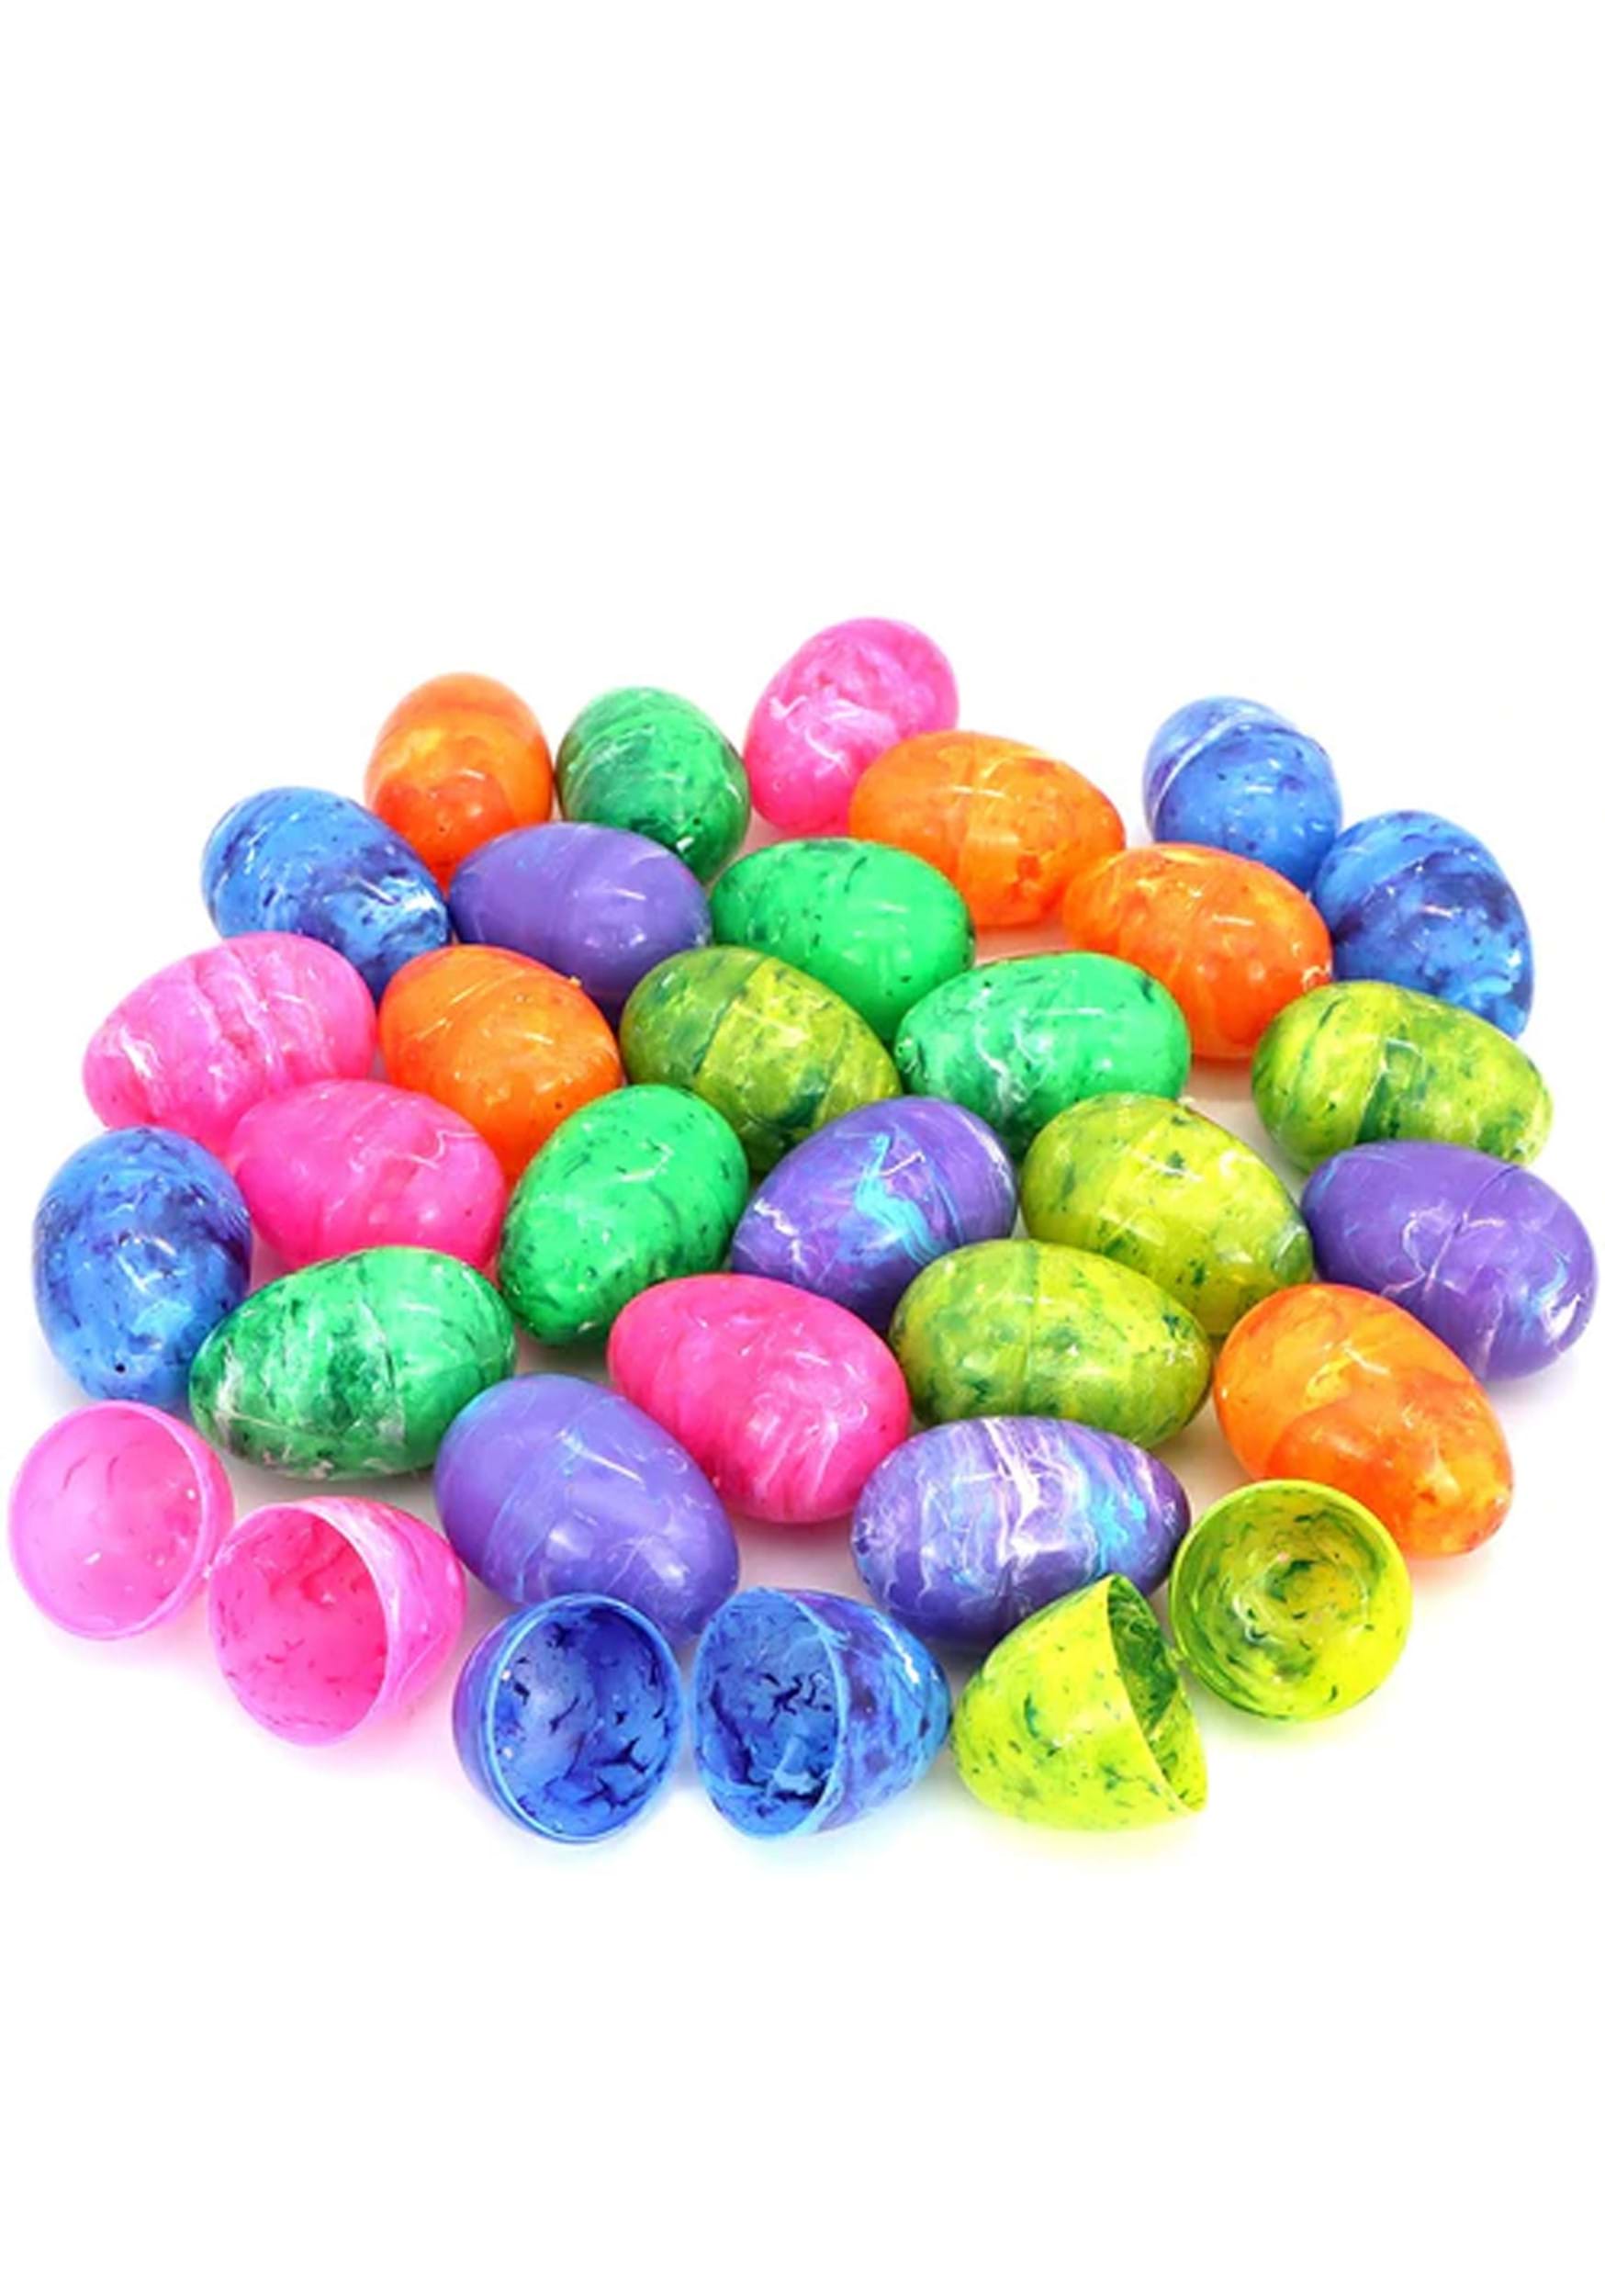 30 Piece 3.15 Inch Iridescent Egg Shells | Easter Gifts